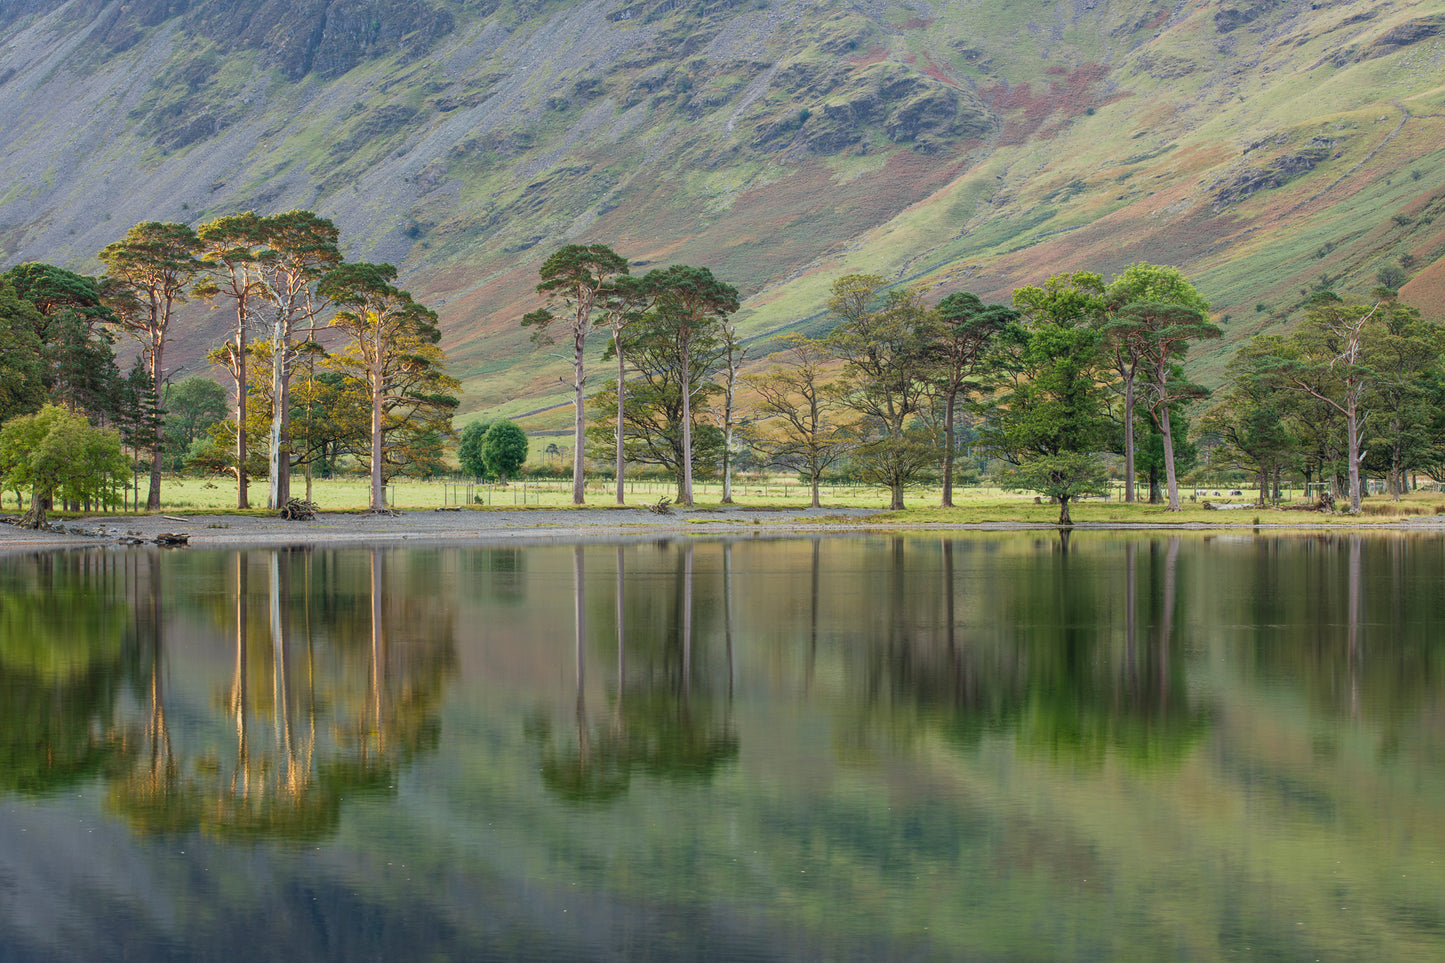 Lake Buttermere, Lake District National Park